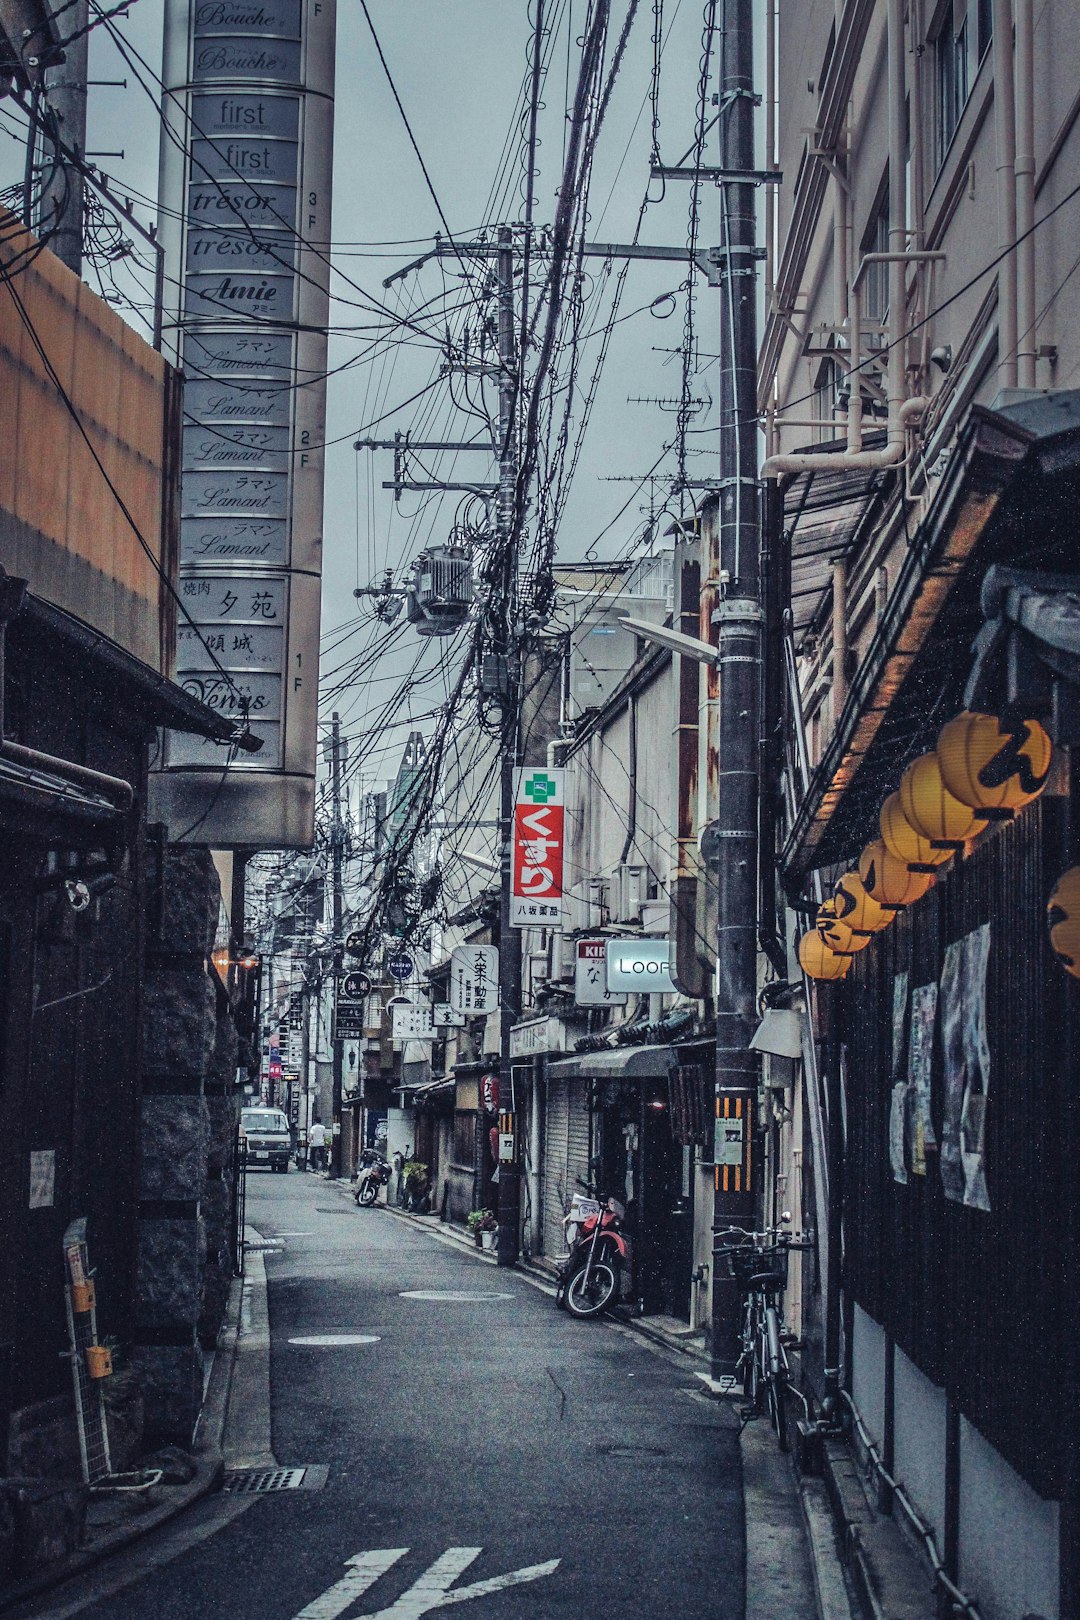 travelers stories about Town in Kyoto, Japan